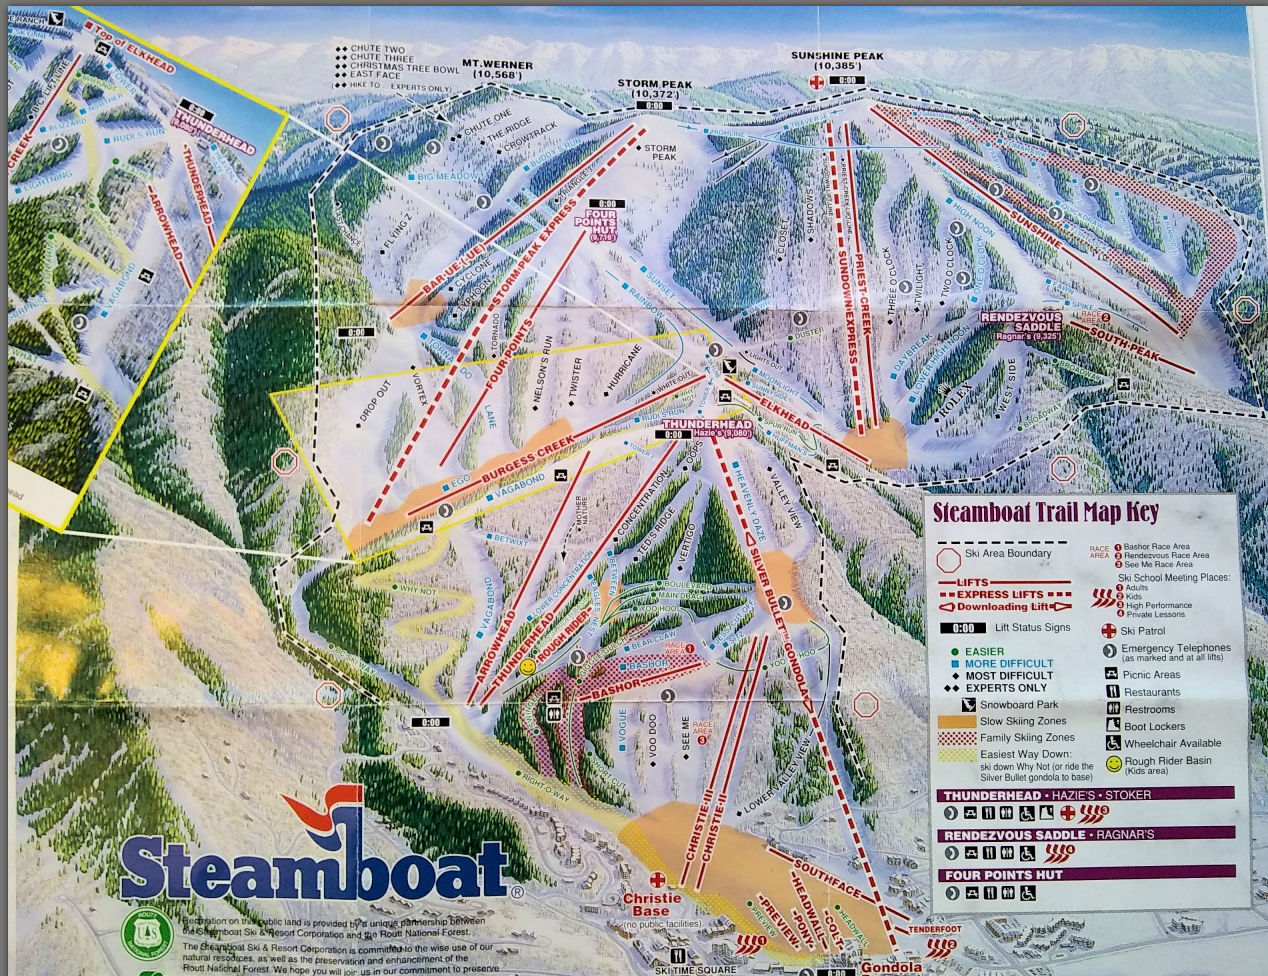 Steamboat1995 map